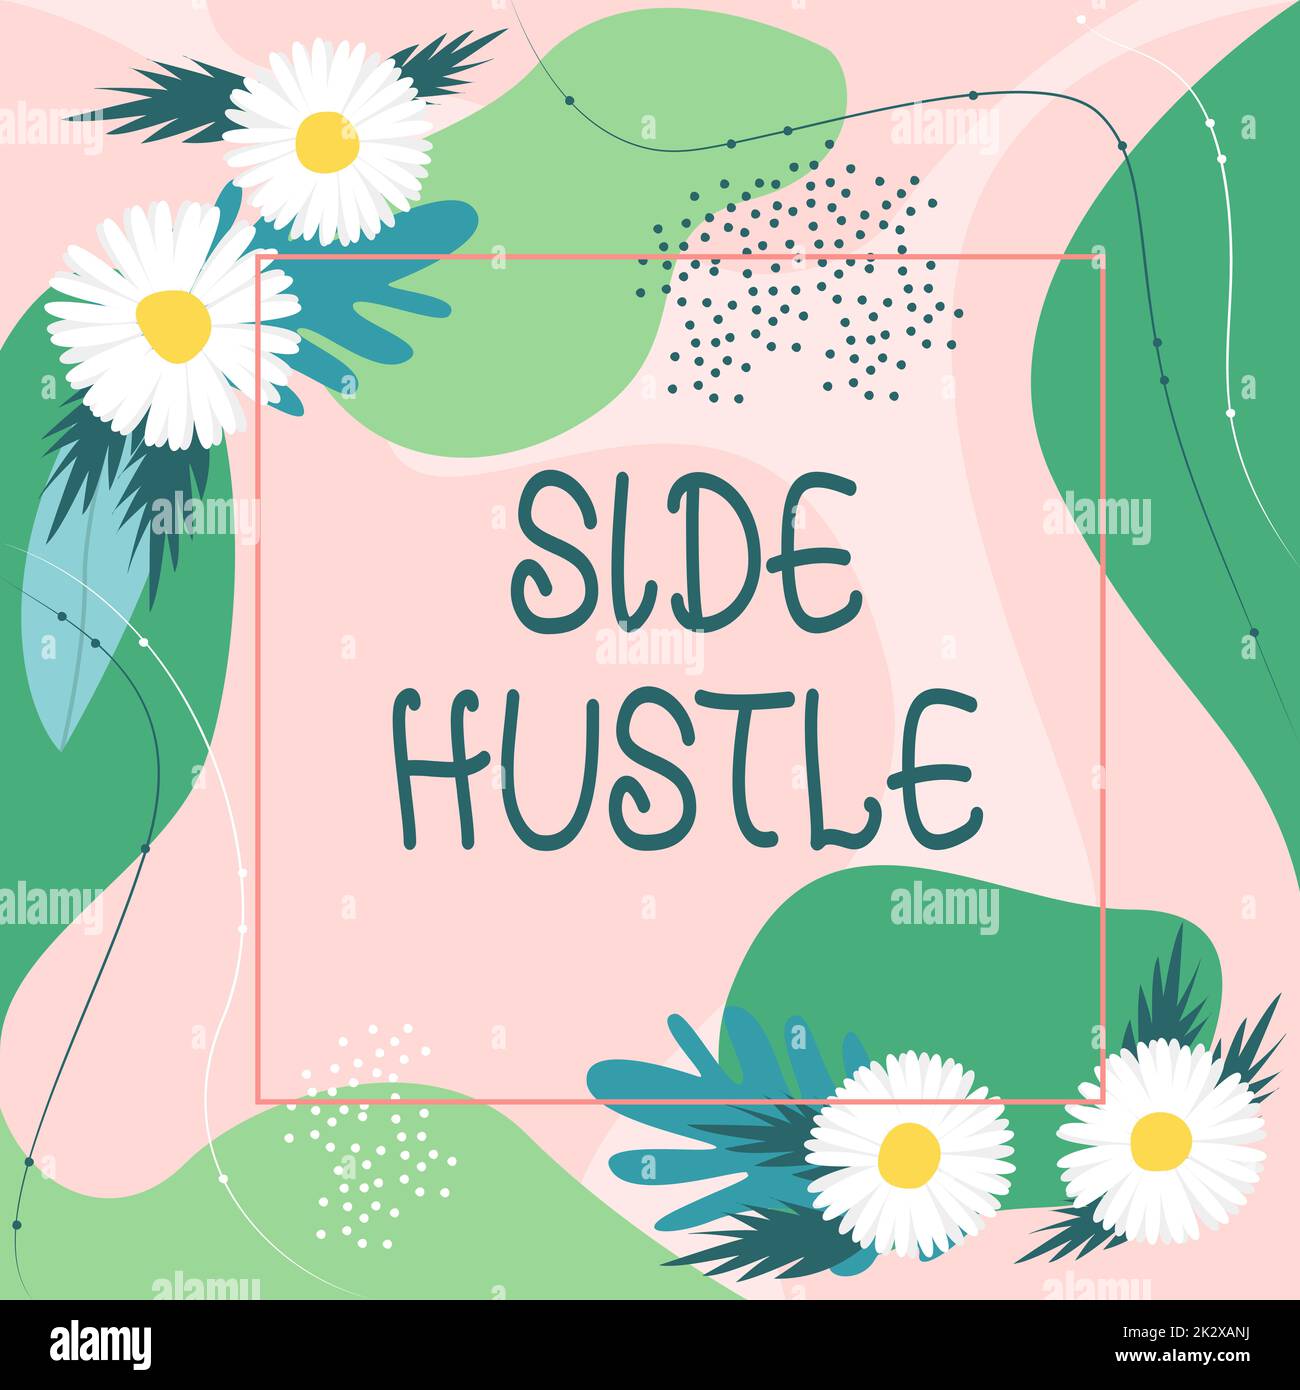 Text caption presenting Side Hustle. Business approach way make some extra cash that allows you flexibility to pursue Blank Frame Decorated With Abstract Modernized Forms Flowers And Foliage. Stock Photo